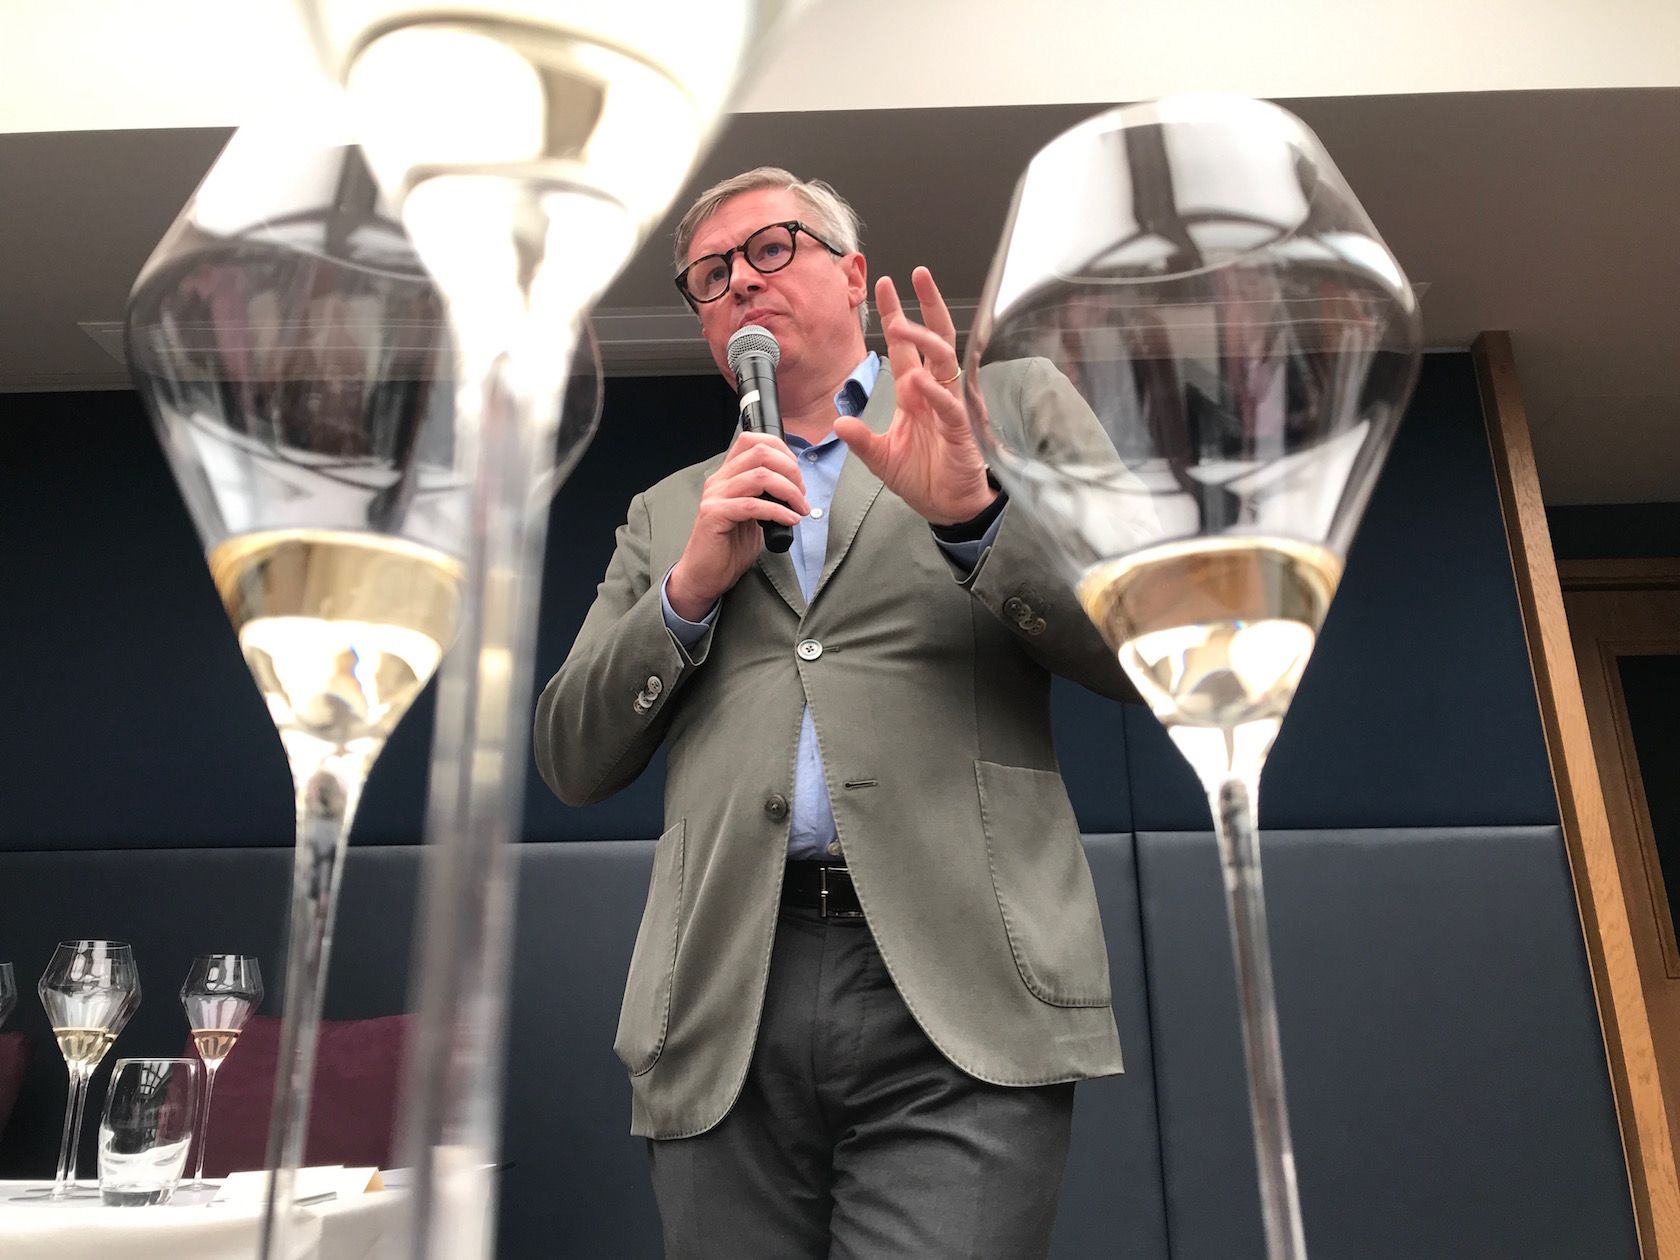 Louis Roederer is changing the style of its top cuvée Cristal 2013